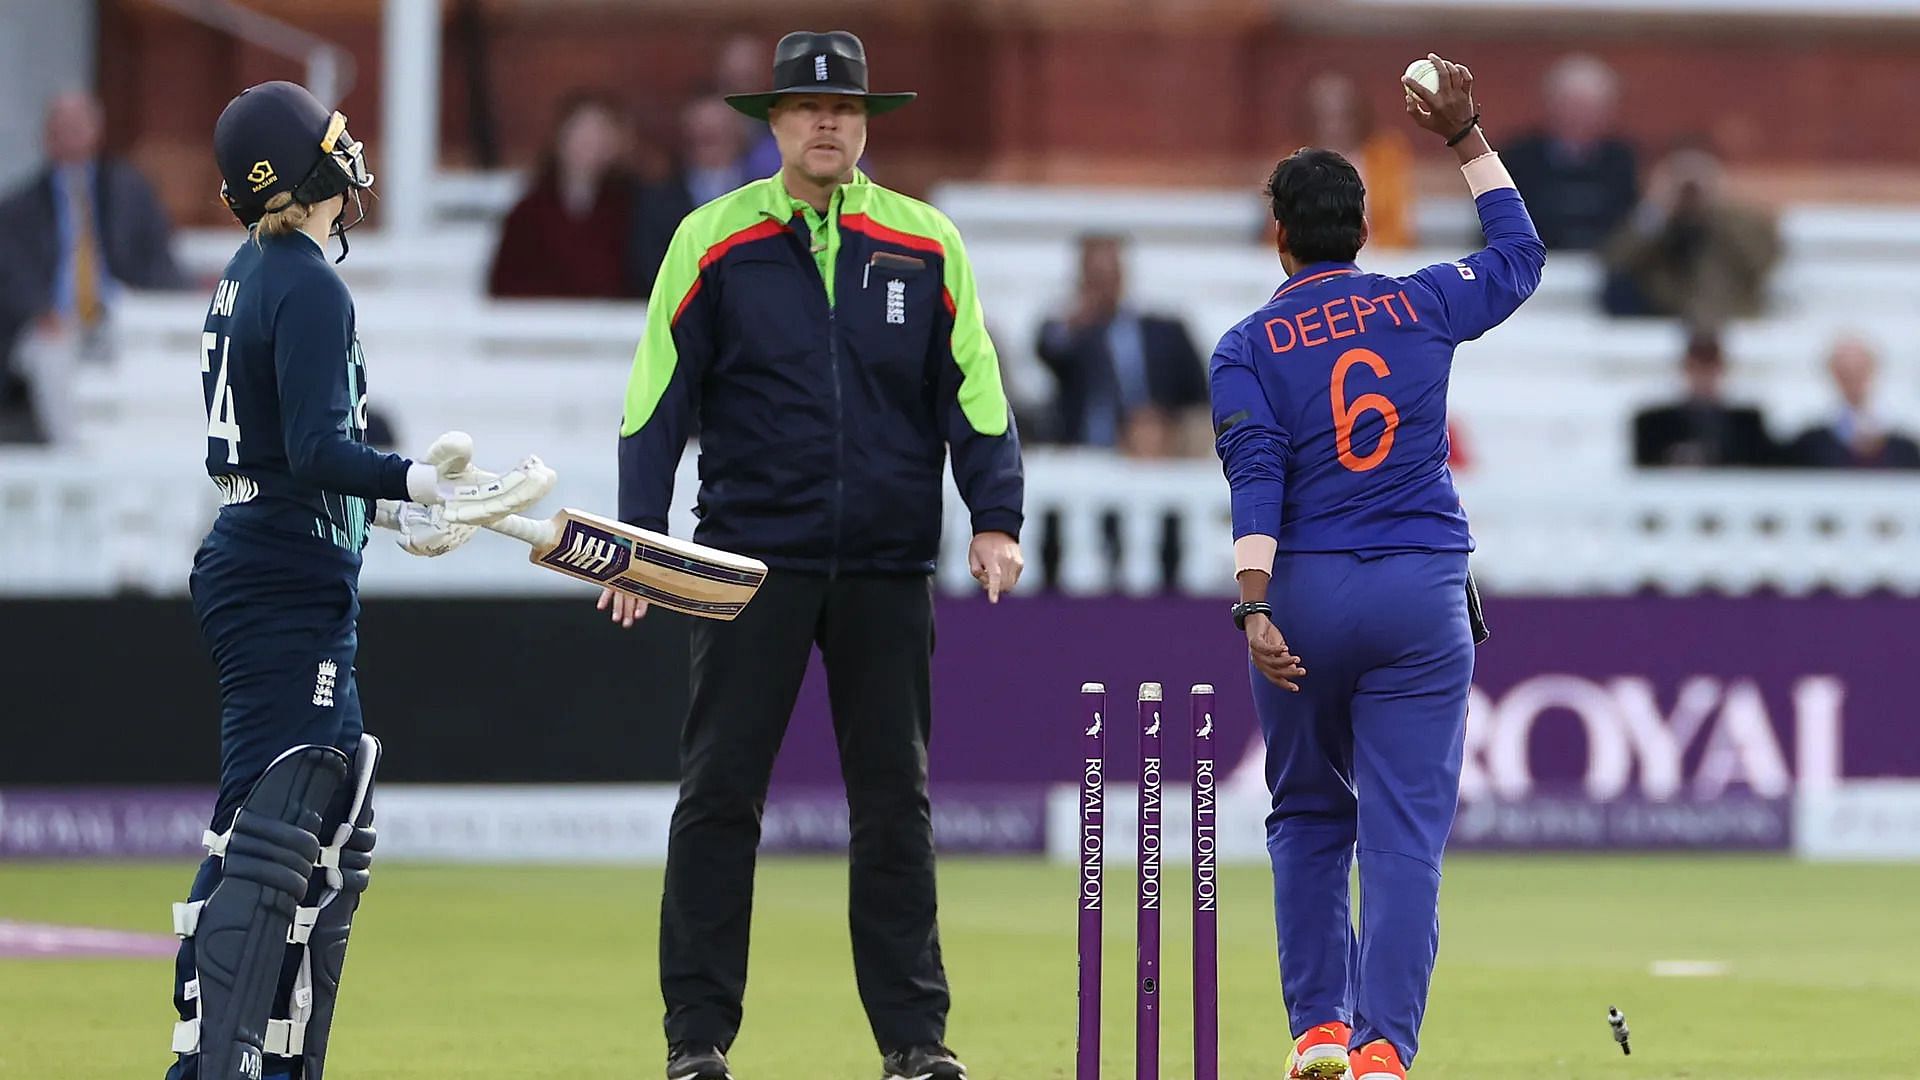 <div class="paragraphs"><p>England's Charlie Dean (right) is run out by Deepti Sharma as&nbsp;India completed a 3-0 ODI series sweep at Lord's on Saturday.&nbsp;&nbsp;</p></div>